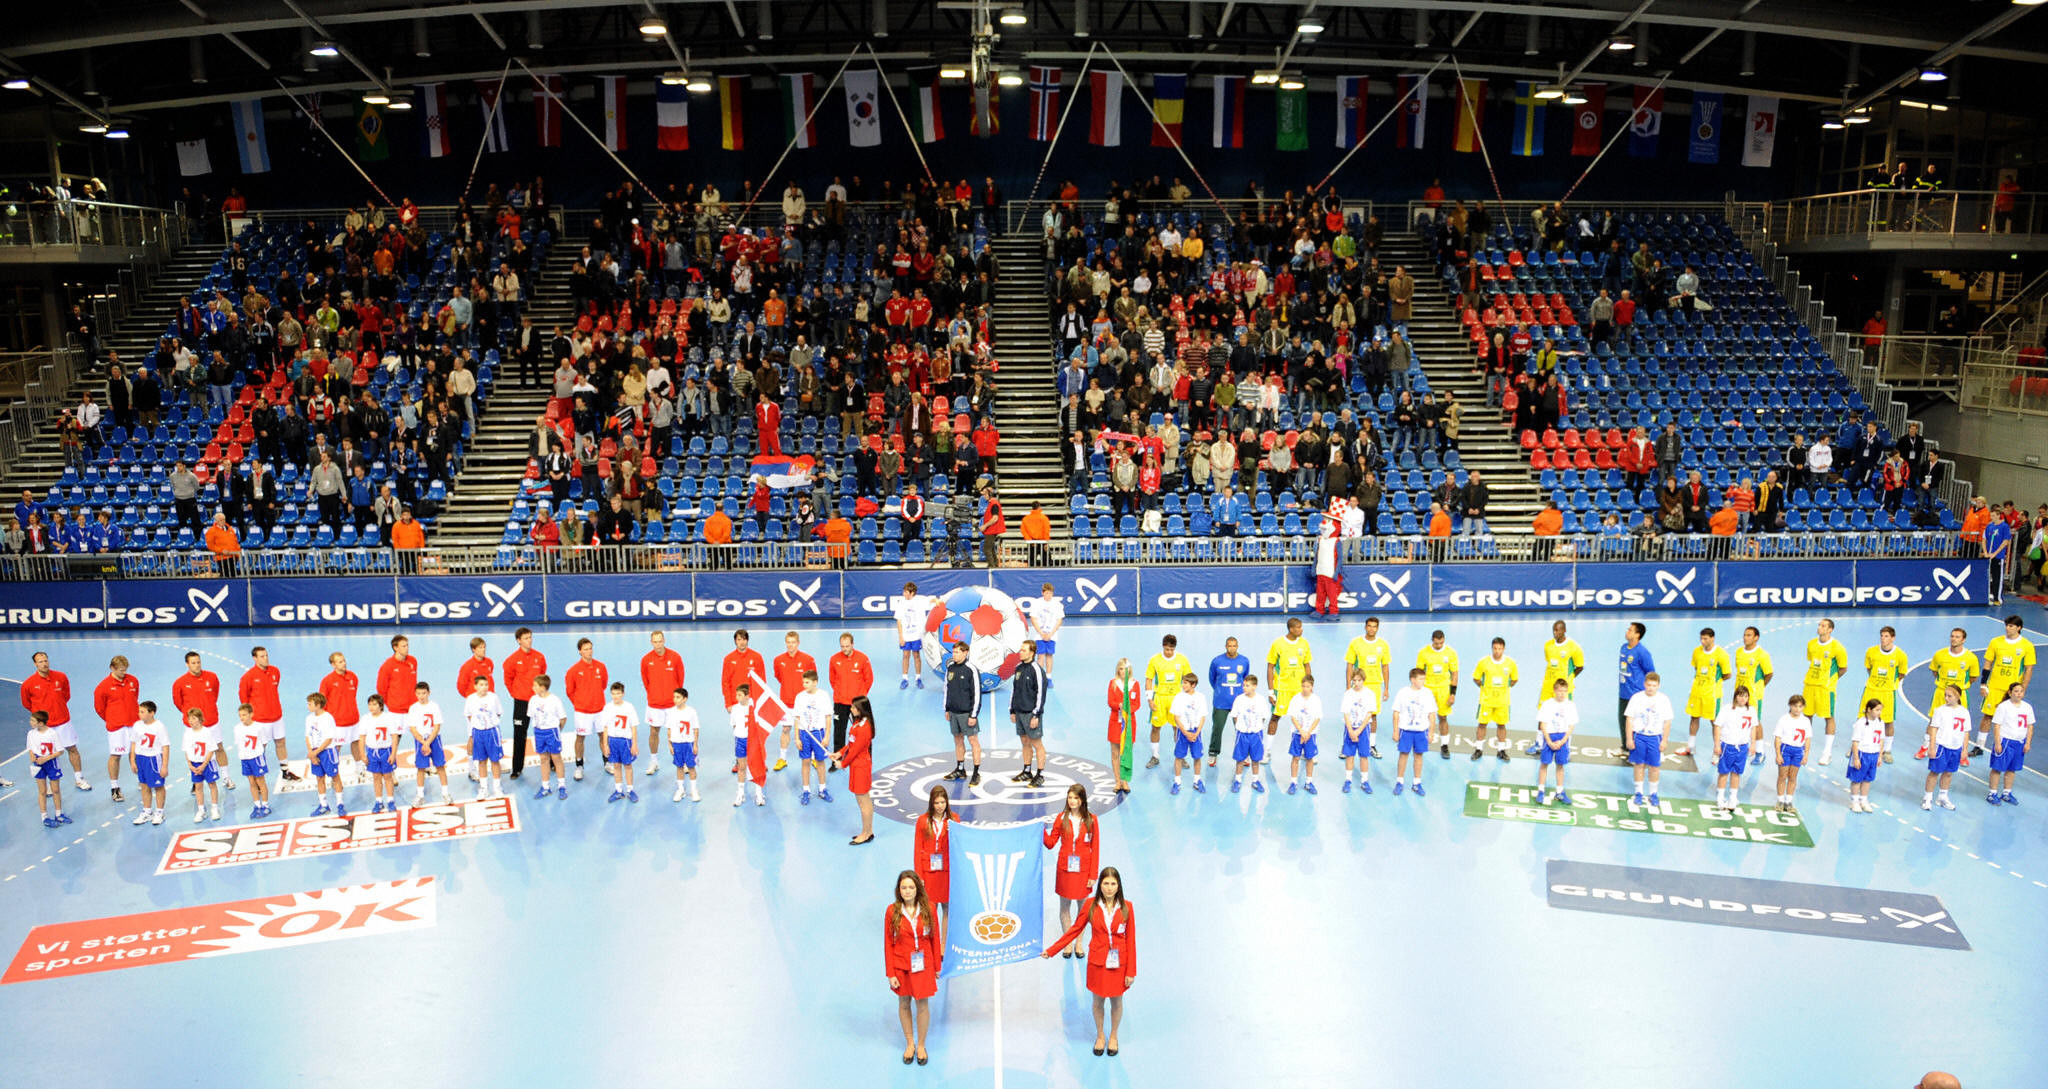 The Žatika Sport Centre set to host the 2025 ITF World Championships was built for the 2009 IHF Men's World Championship ©Getty Images